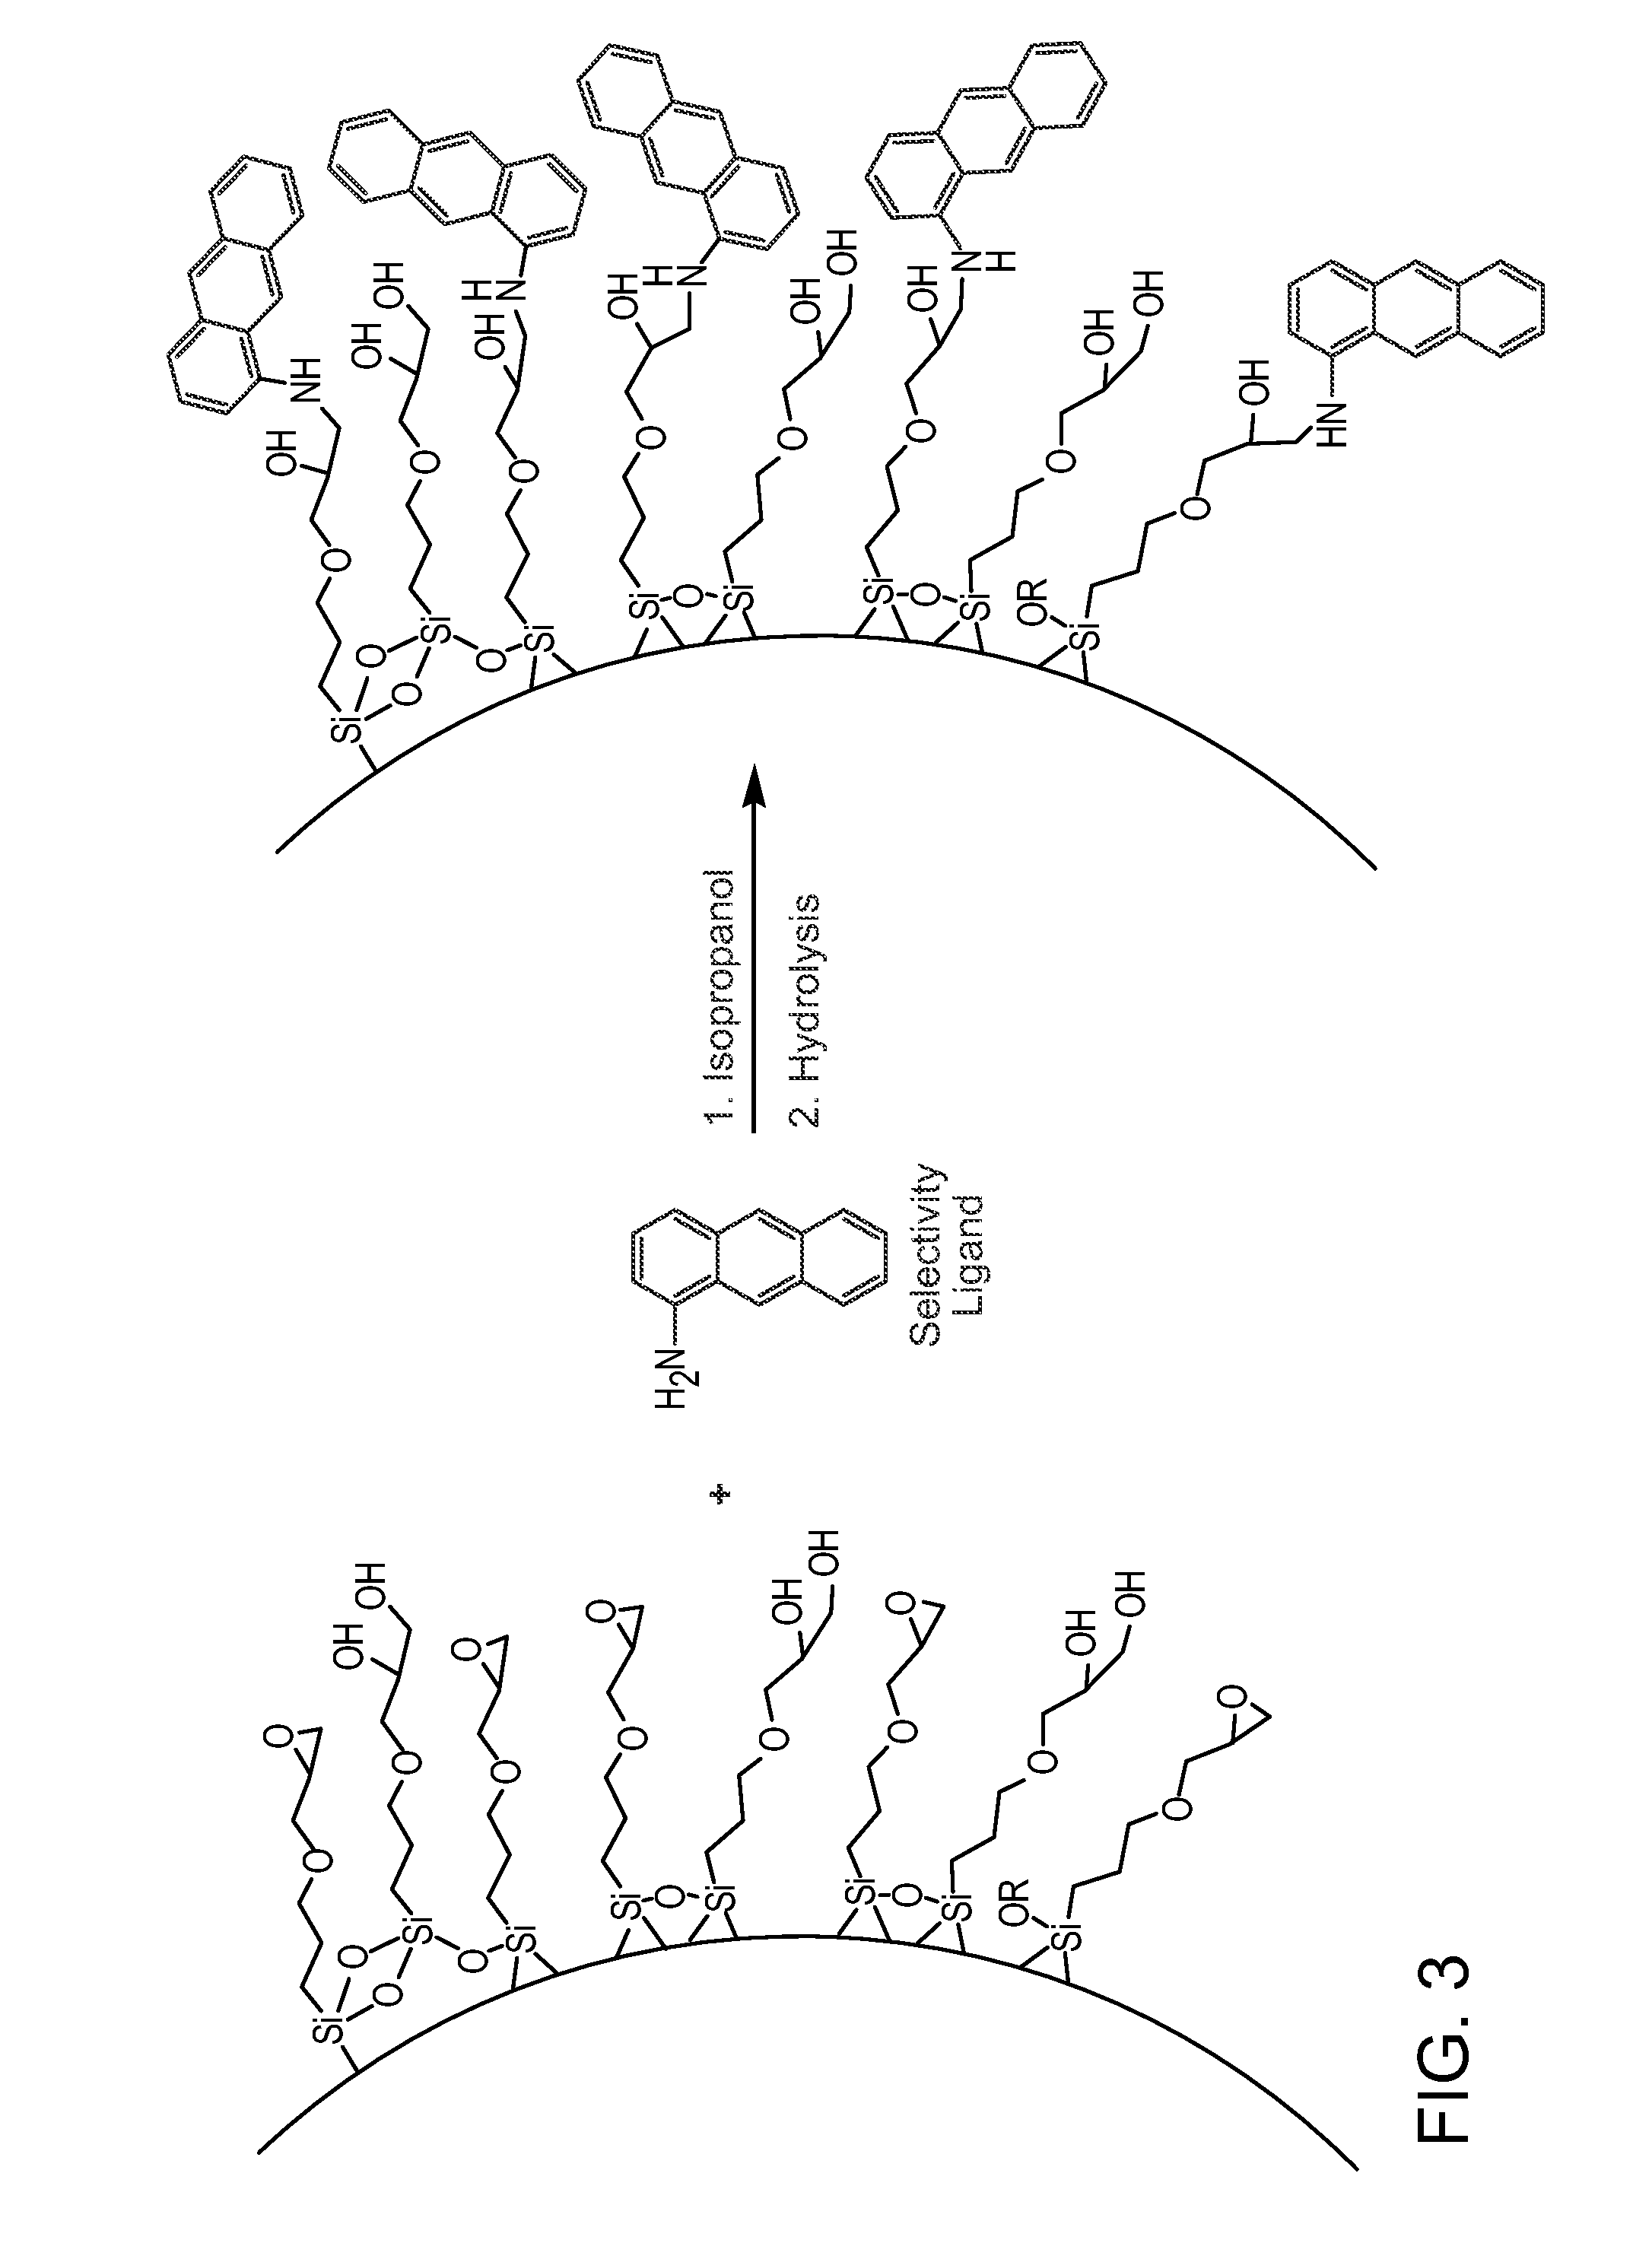 Chromatographic materials for the separation of unsaturated molecules